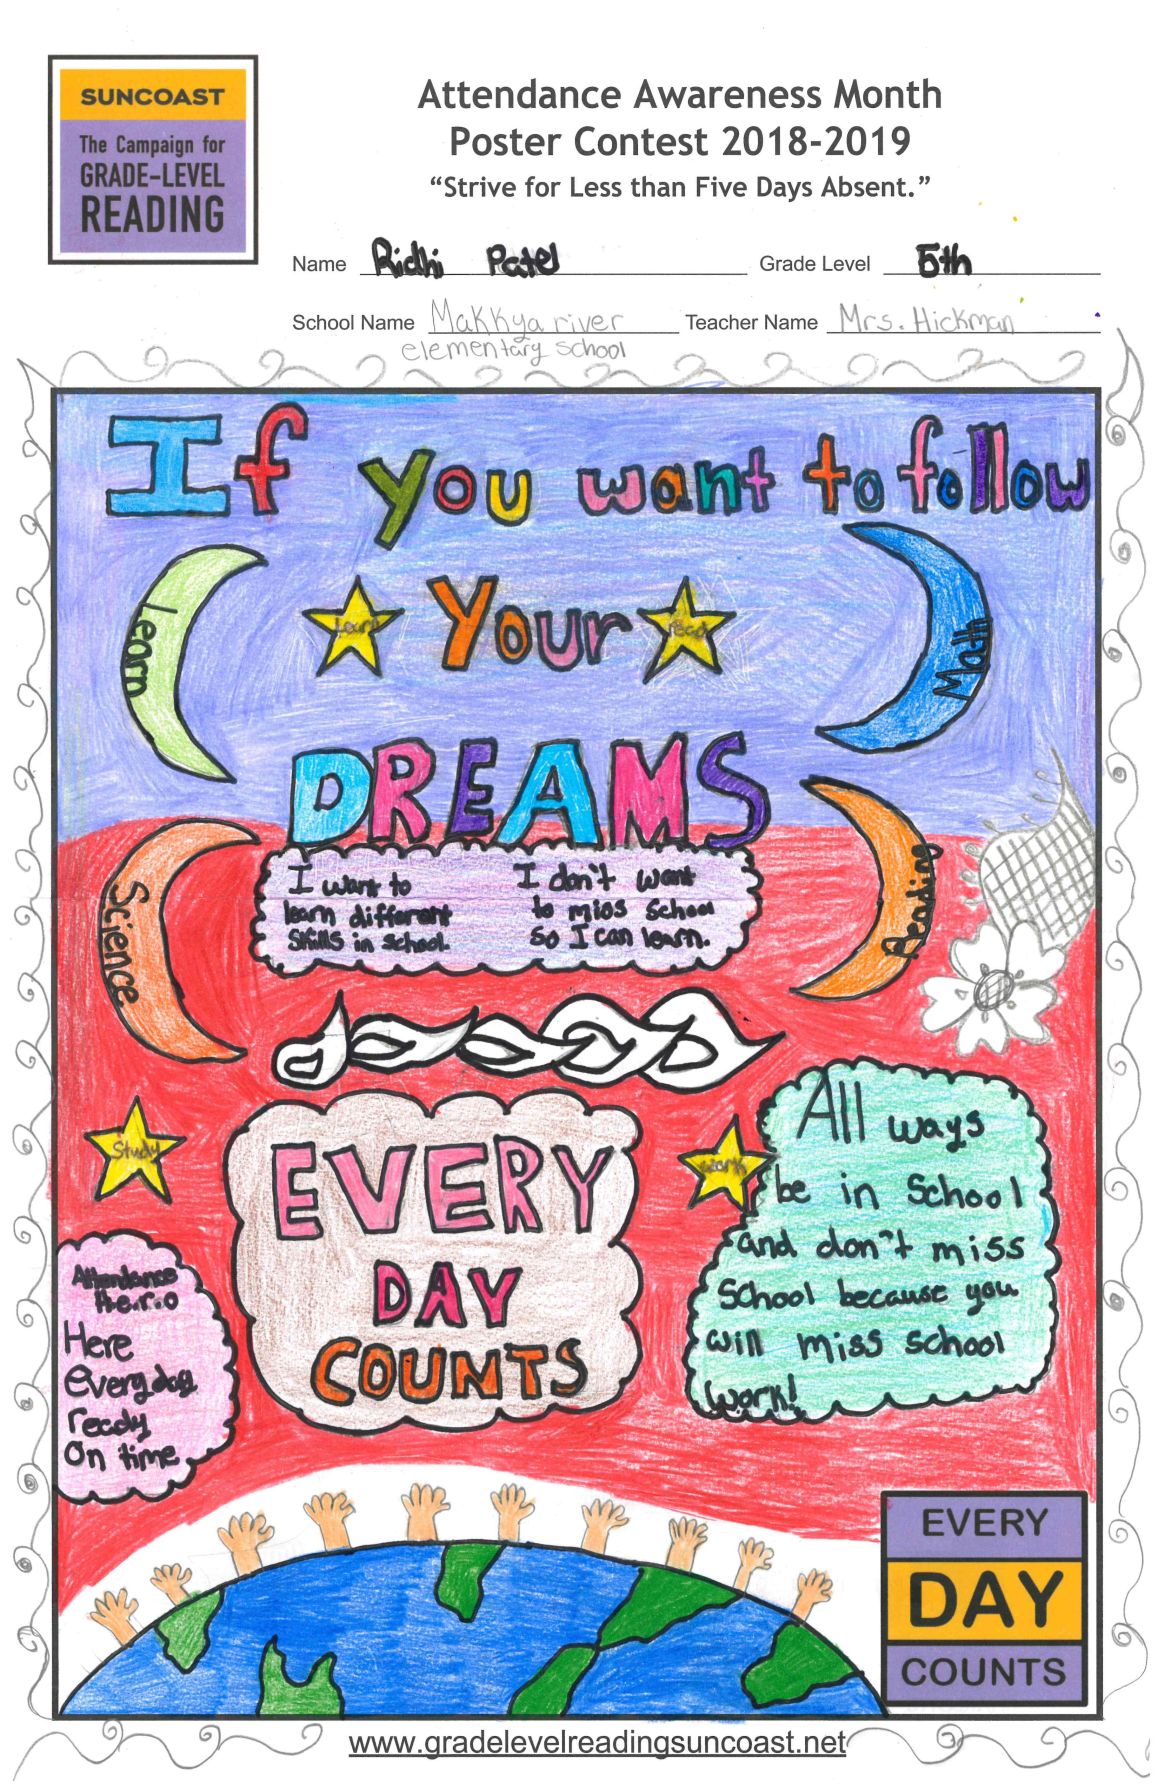 Student winners of attendance poster contest announced | North Port Sun ...